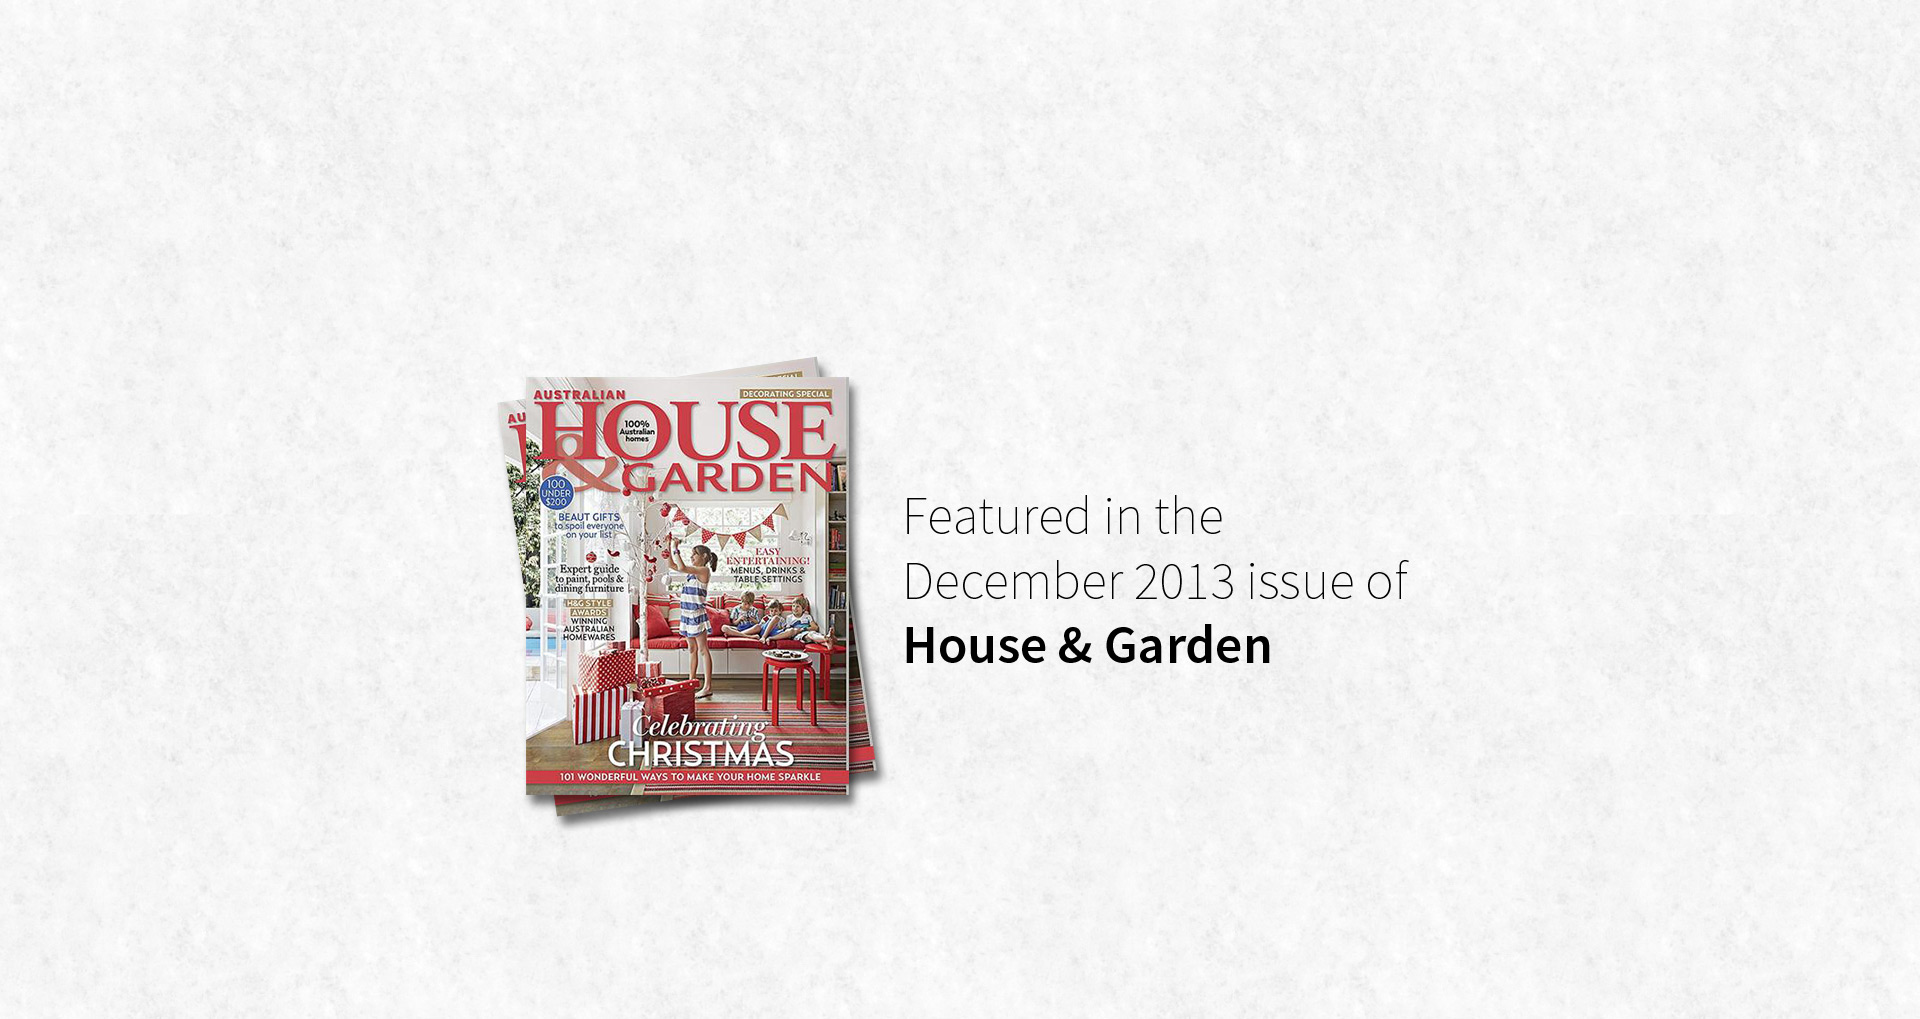 Featured in the December 2013 issue of House & Garden